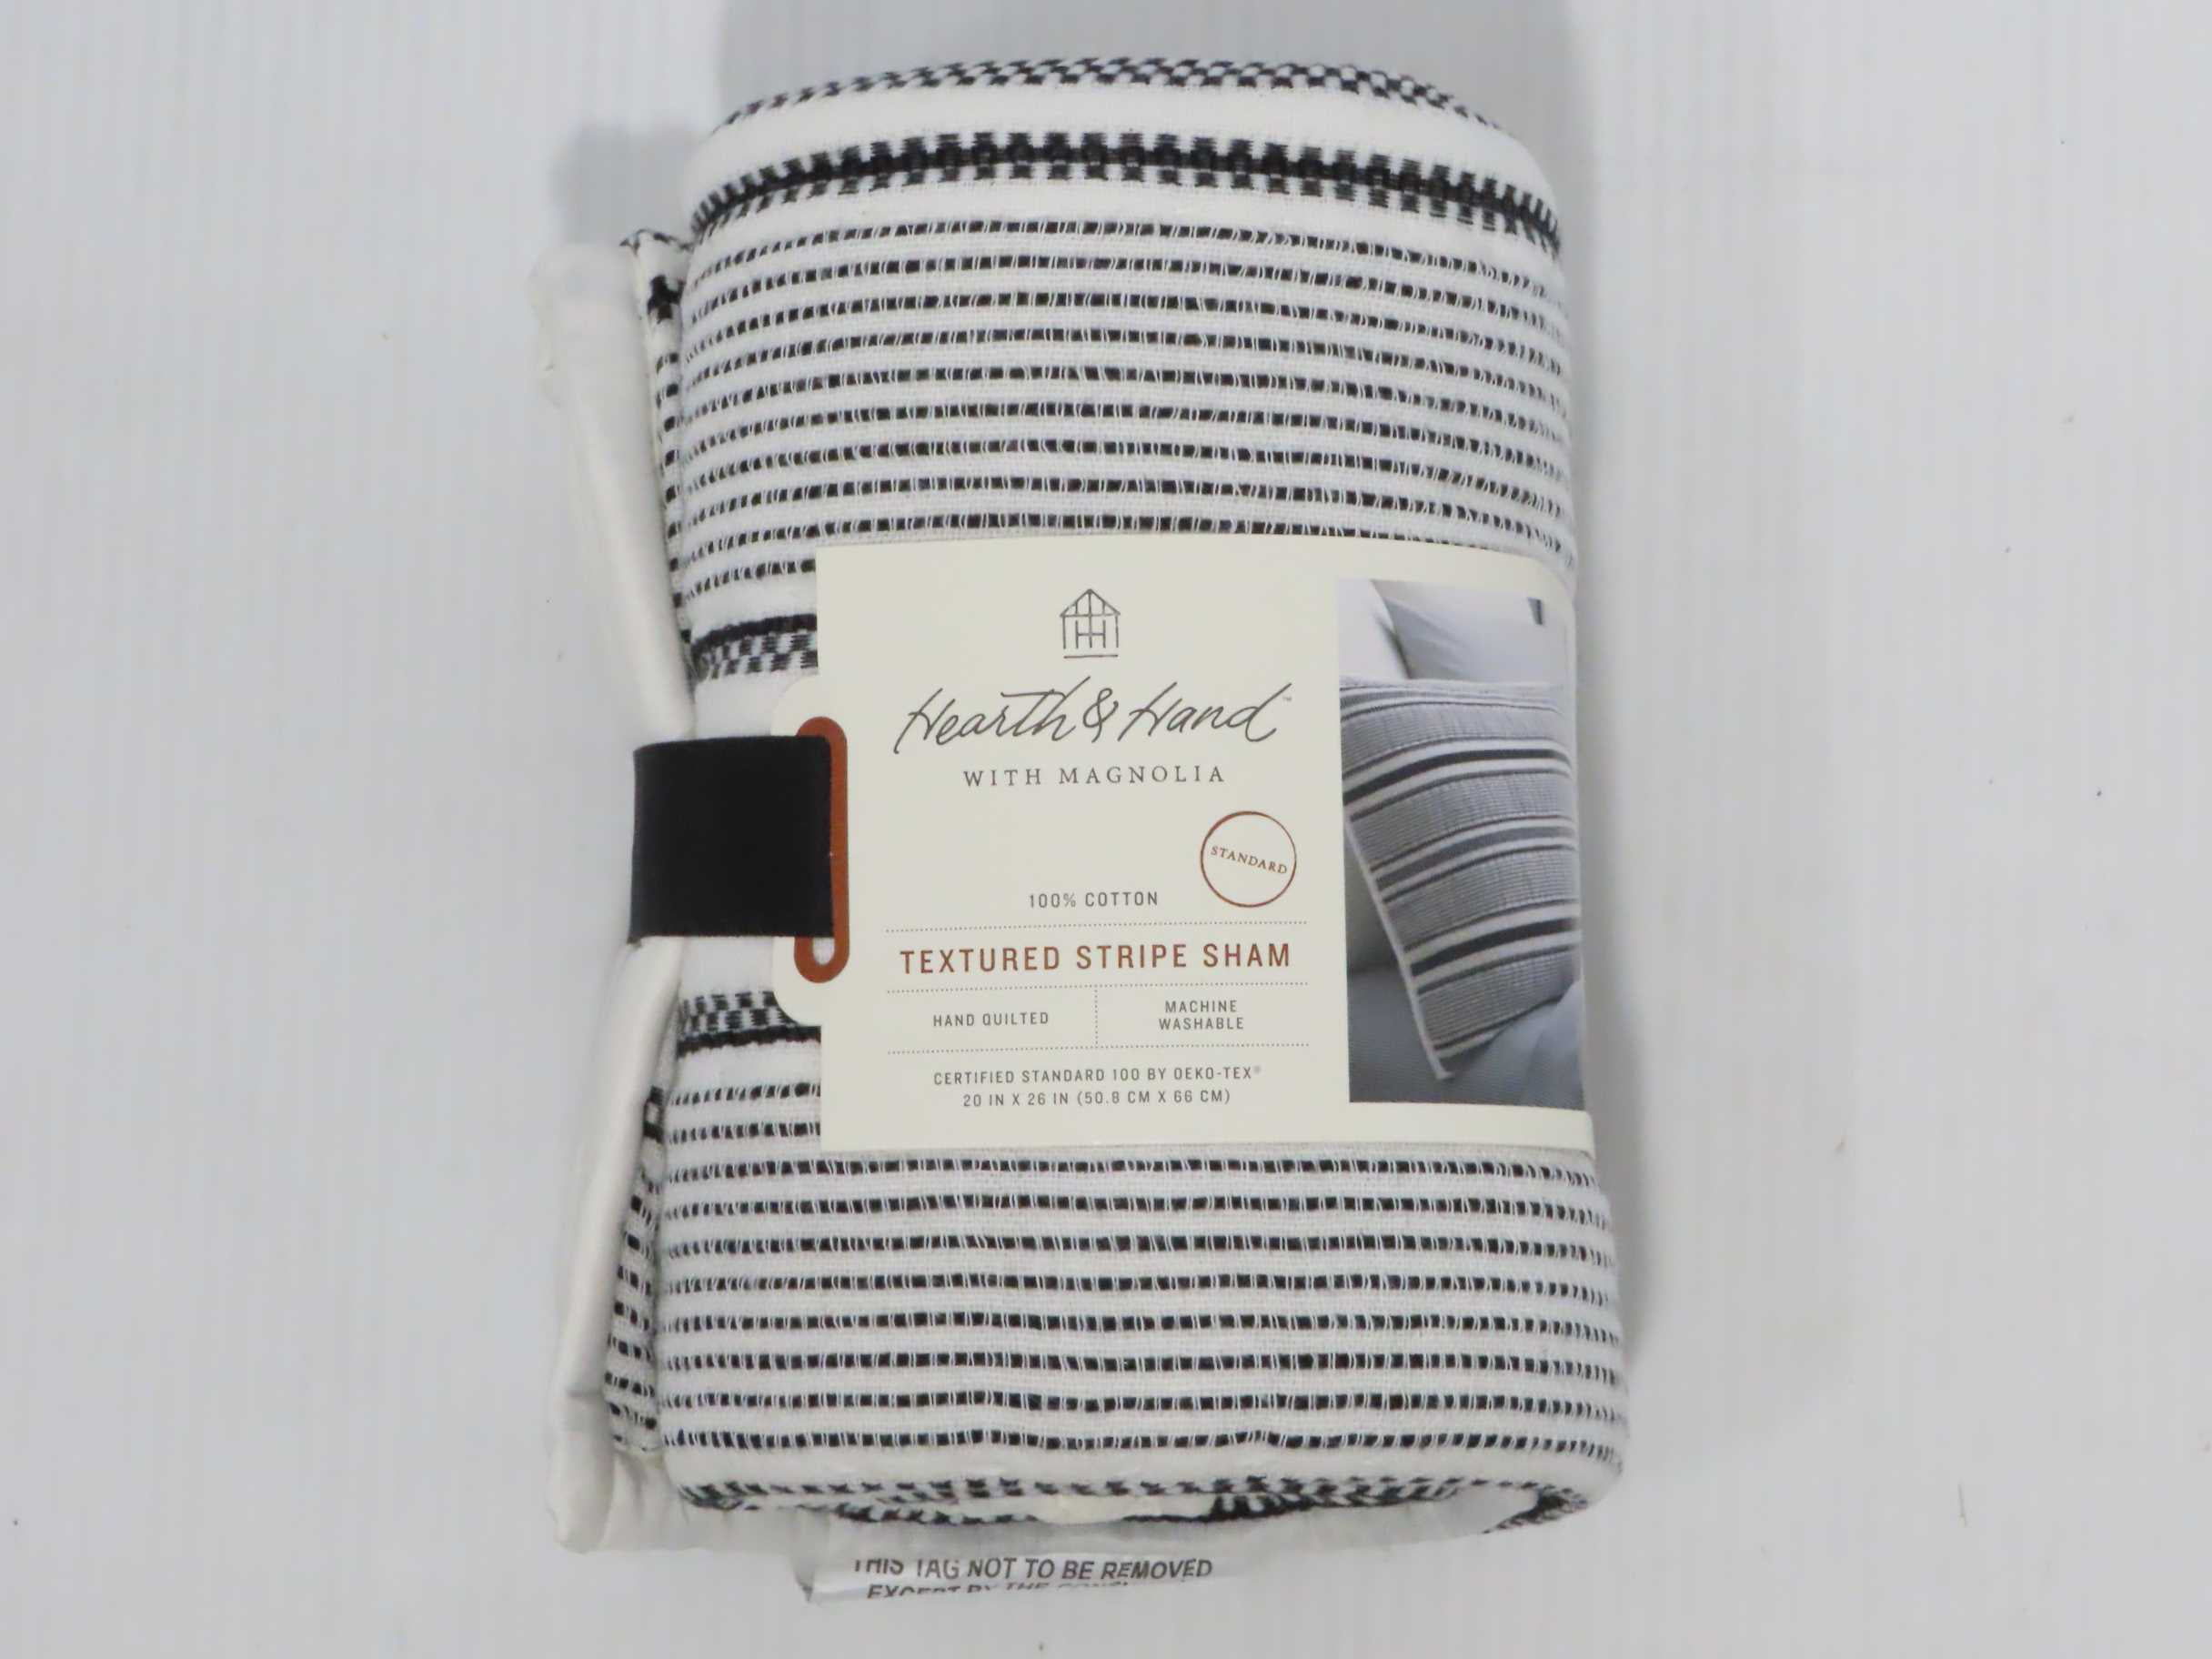 16x42 Quilted Stripe Lumbar Bed Pillow Gray/Cream - Hearth